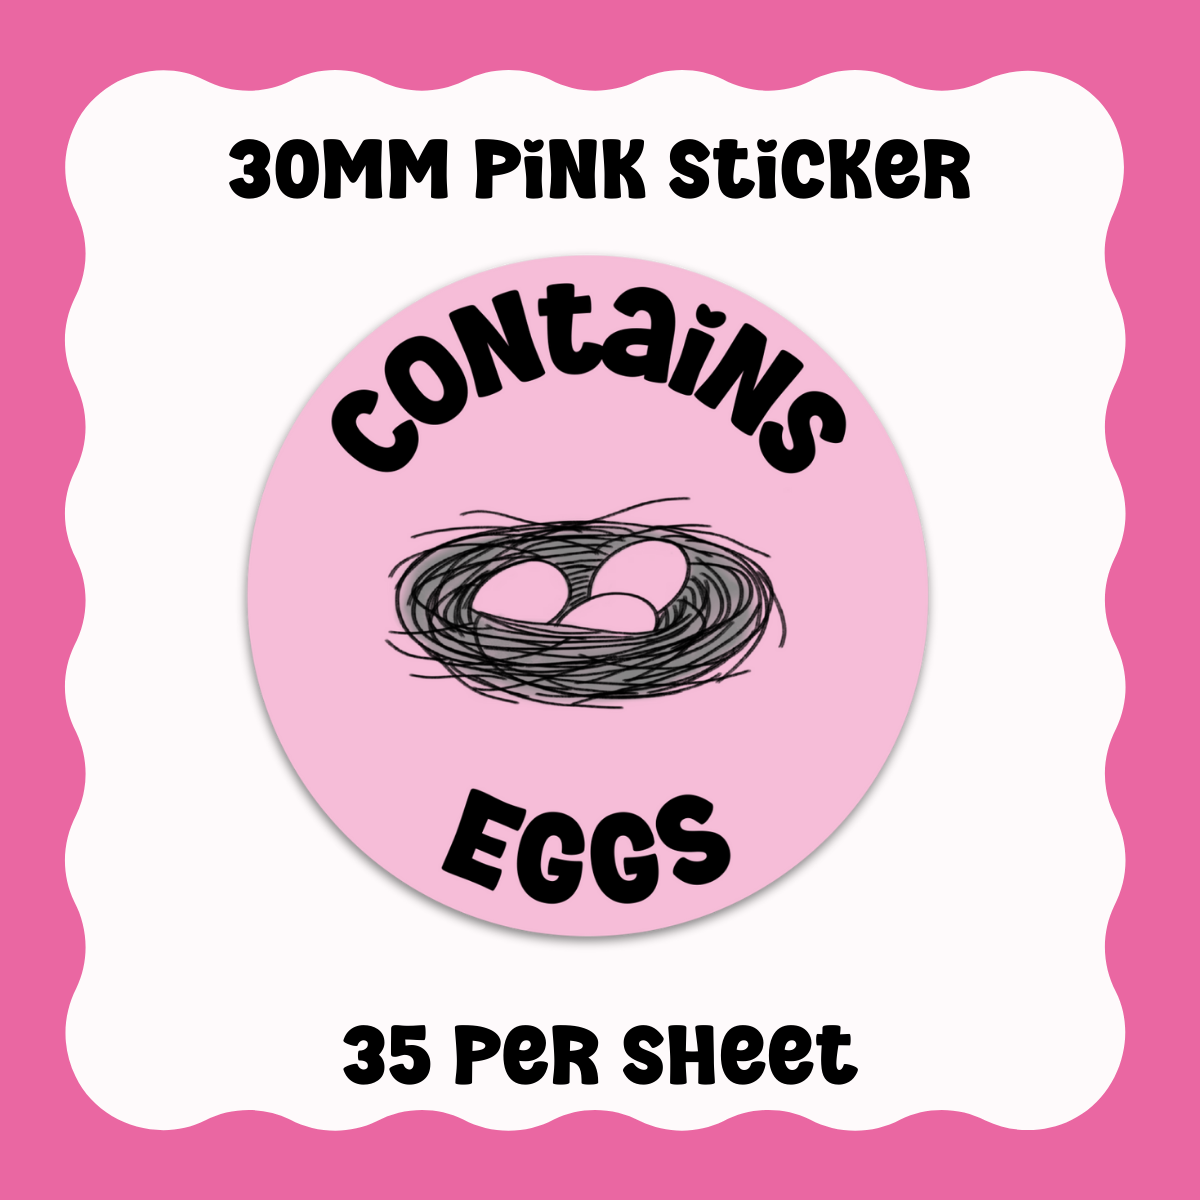 Contains Eggs Stickers - With Graphic